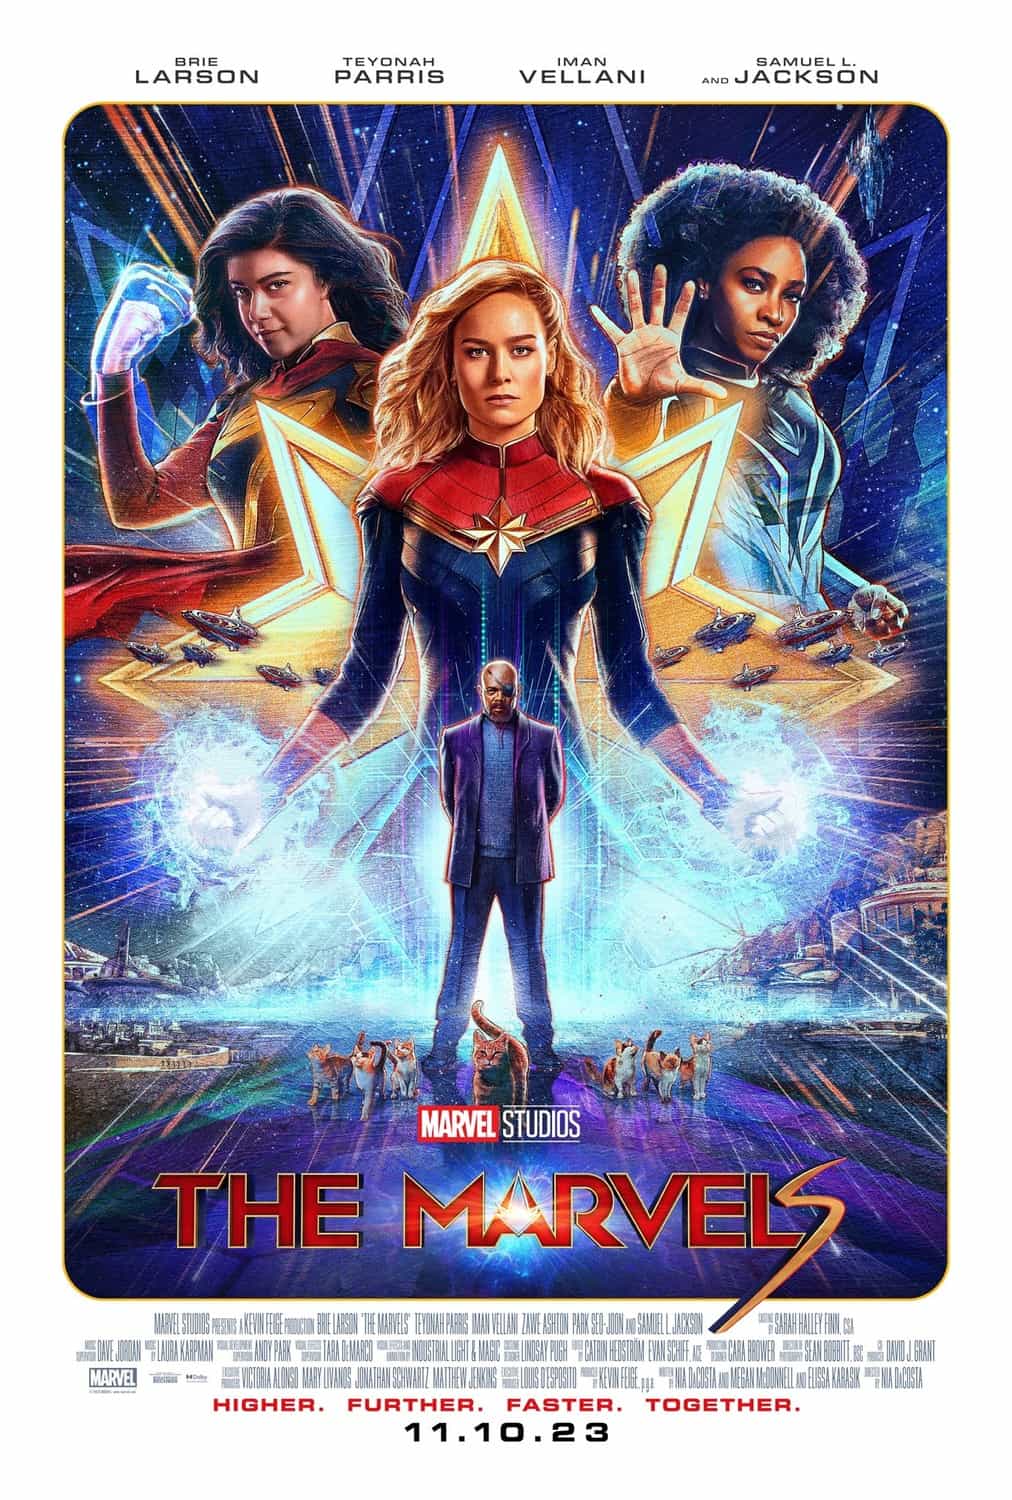 A delay to November 10th with a new teaser poster for The Marvels which stars Brie Larson and Teyonah Parris #themarvels